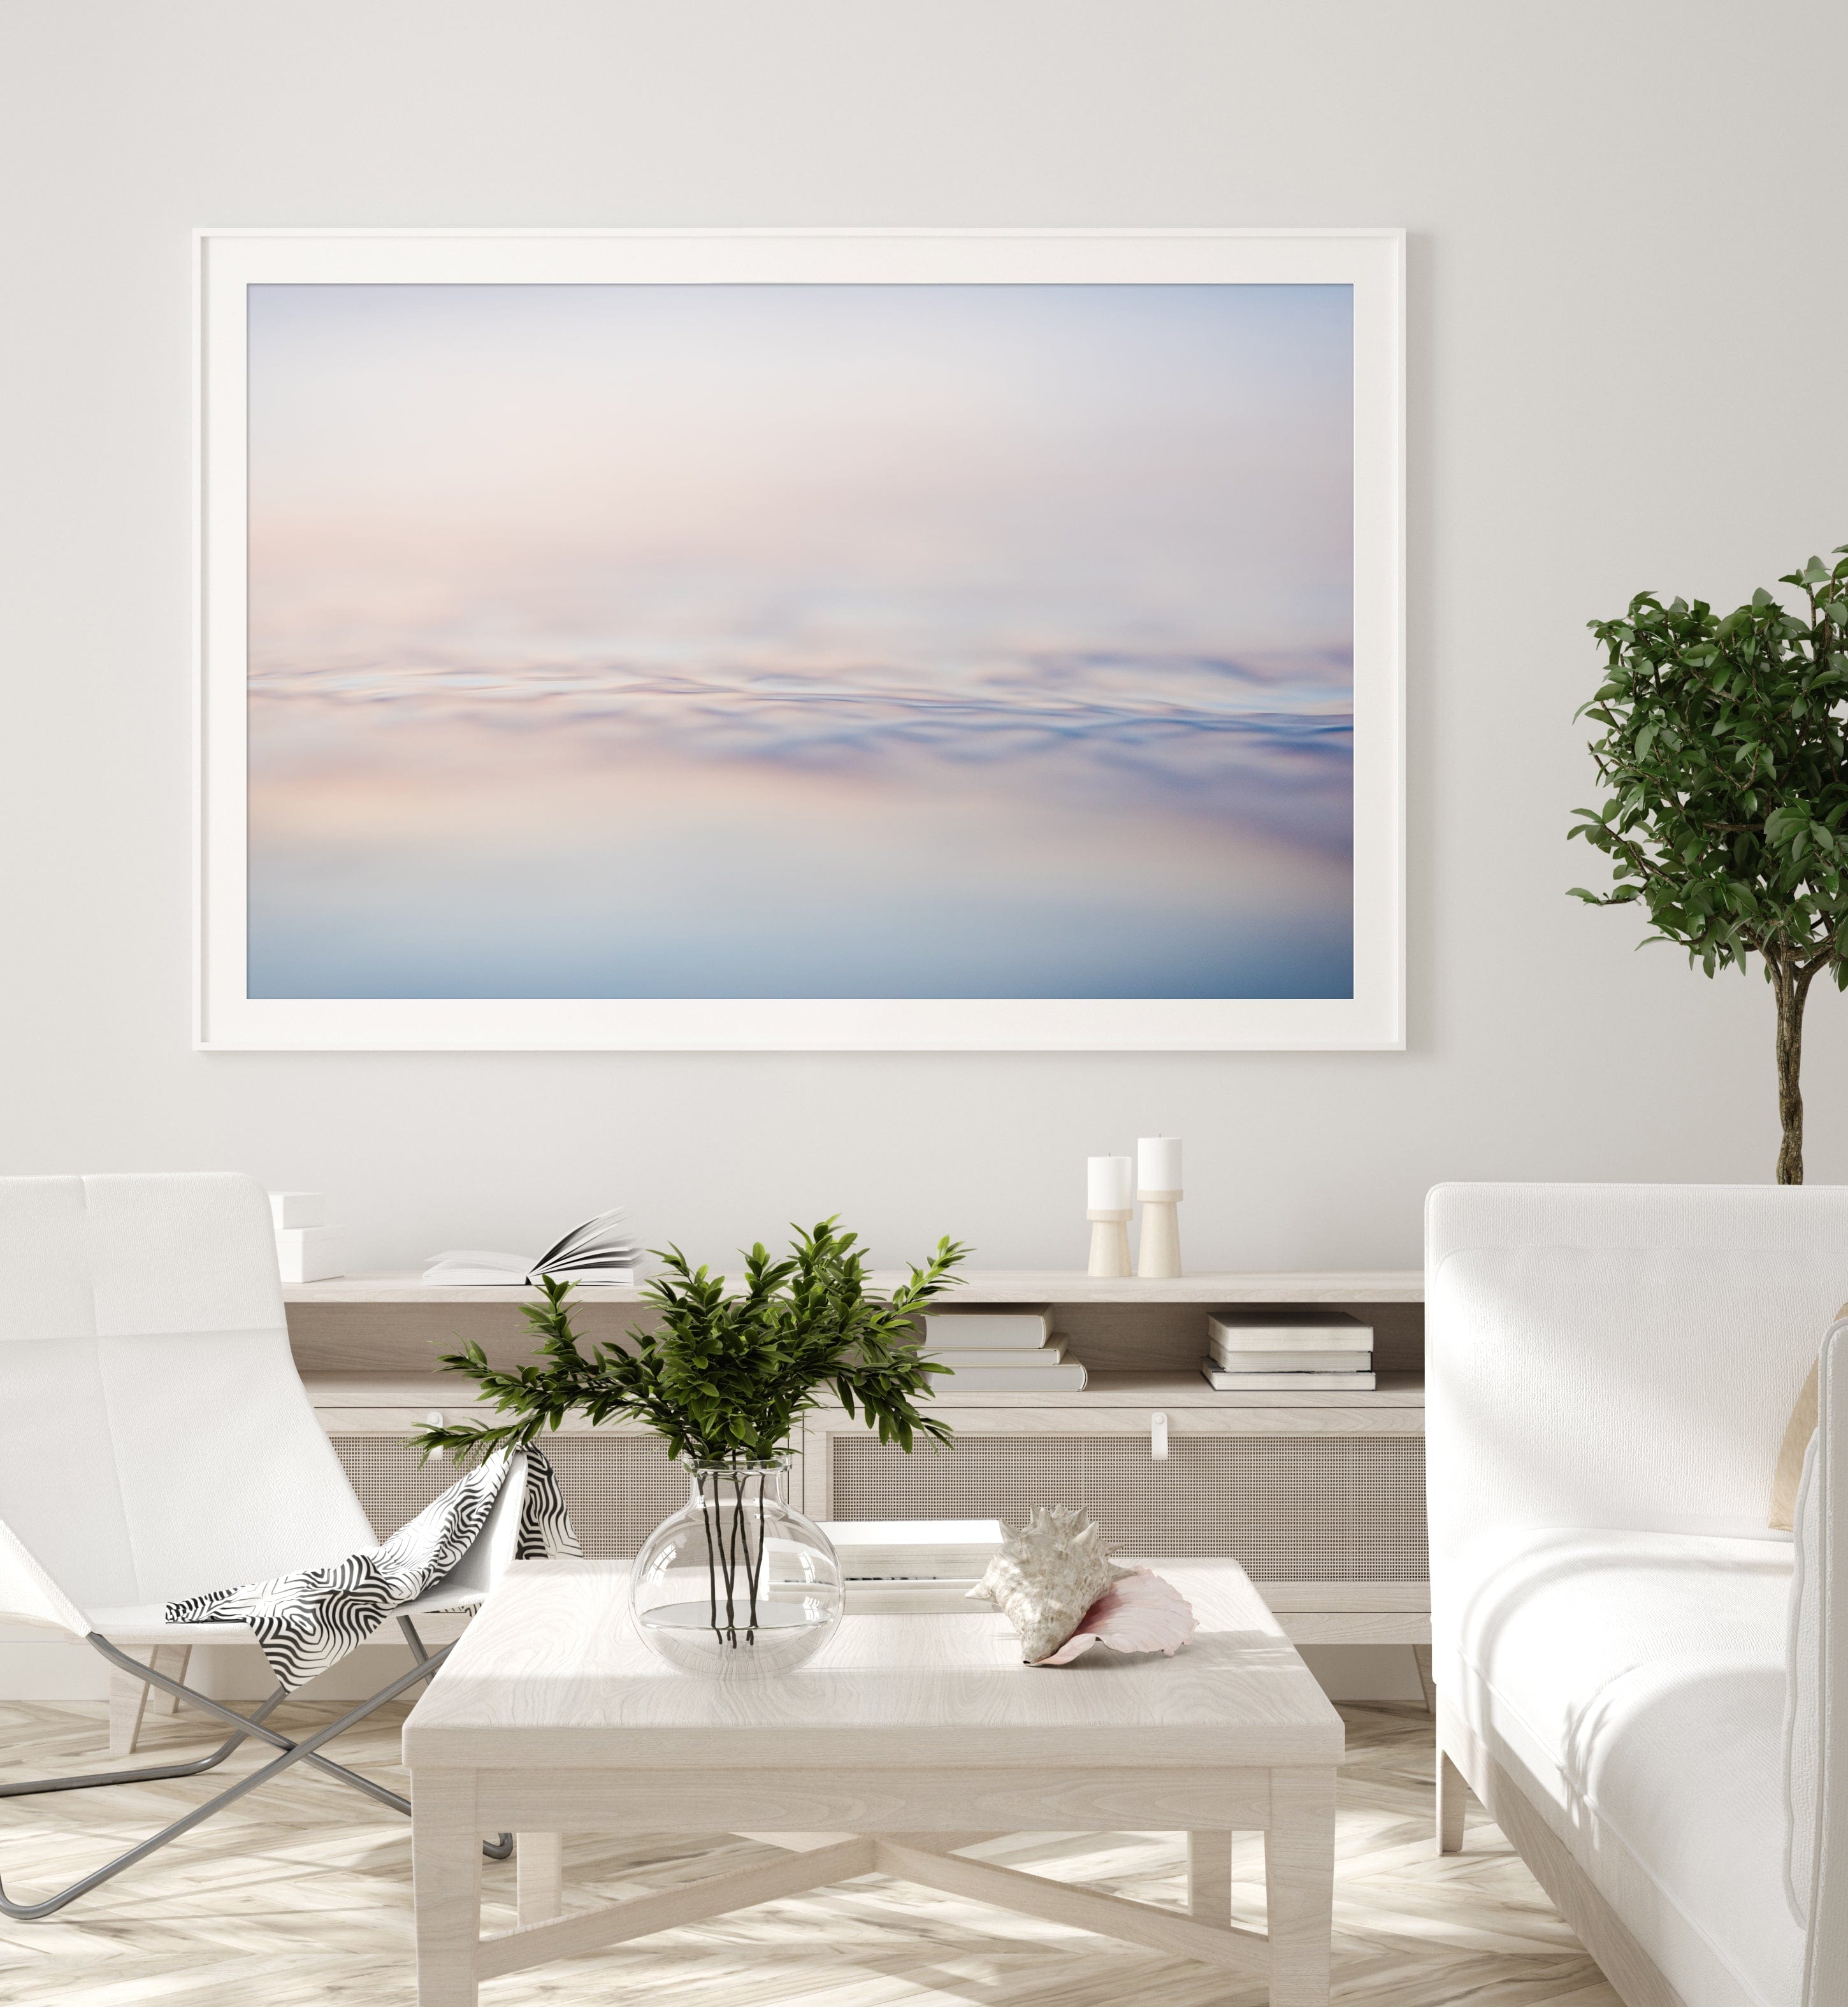 Cate Brown Photo Fine Art Print / 8"x12" / None (Print Only) Pastel Dreams #2  //  Ocean Photography Made to Order Ocean Fine Art